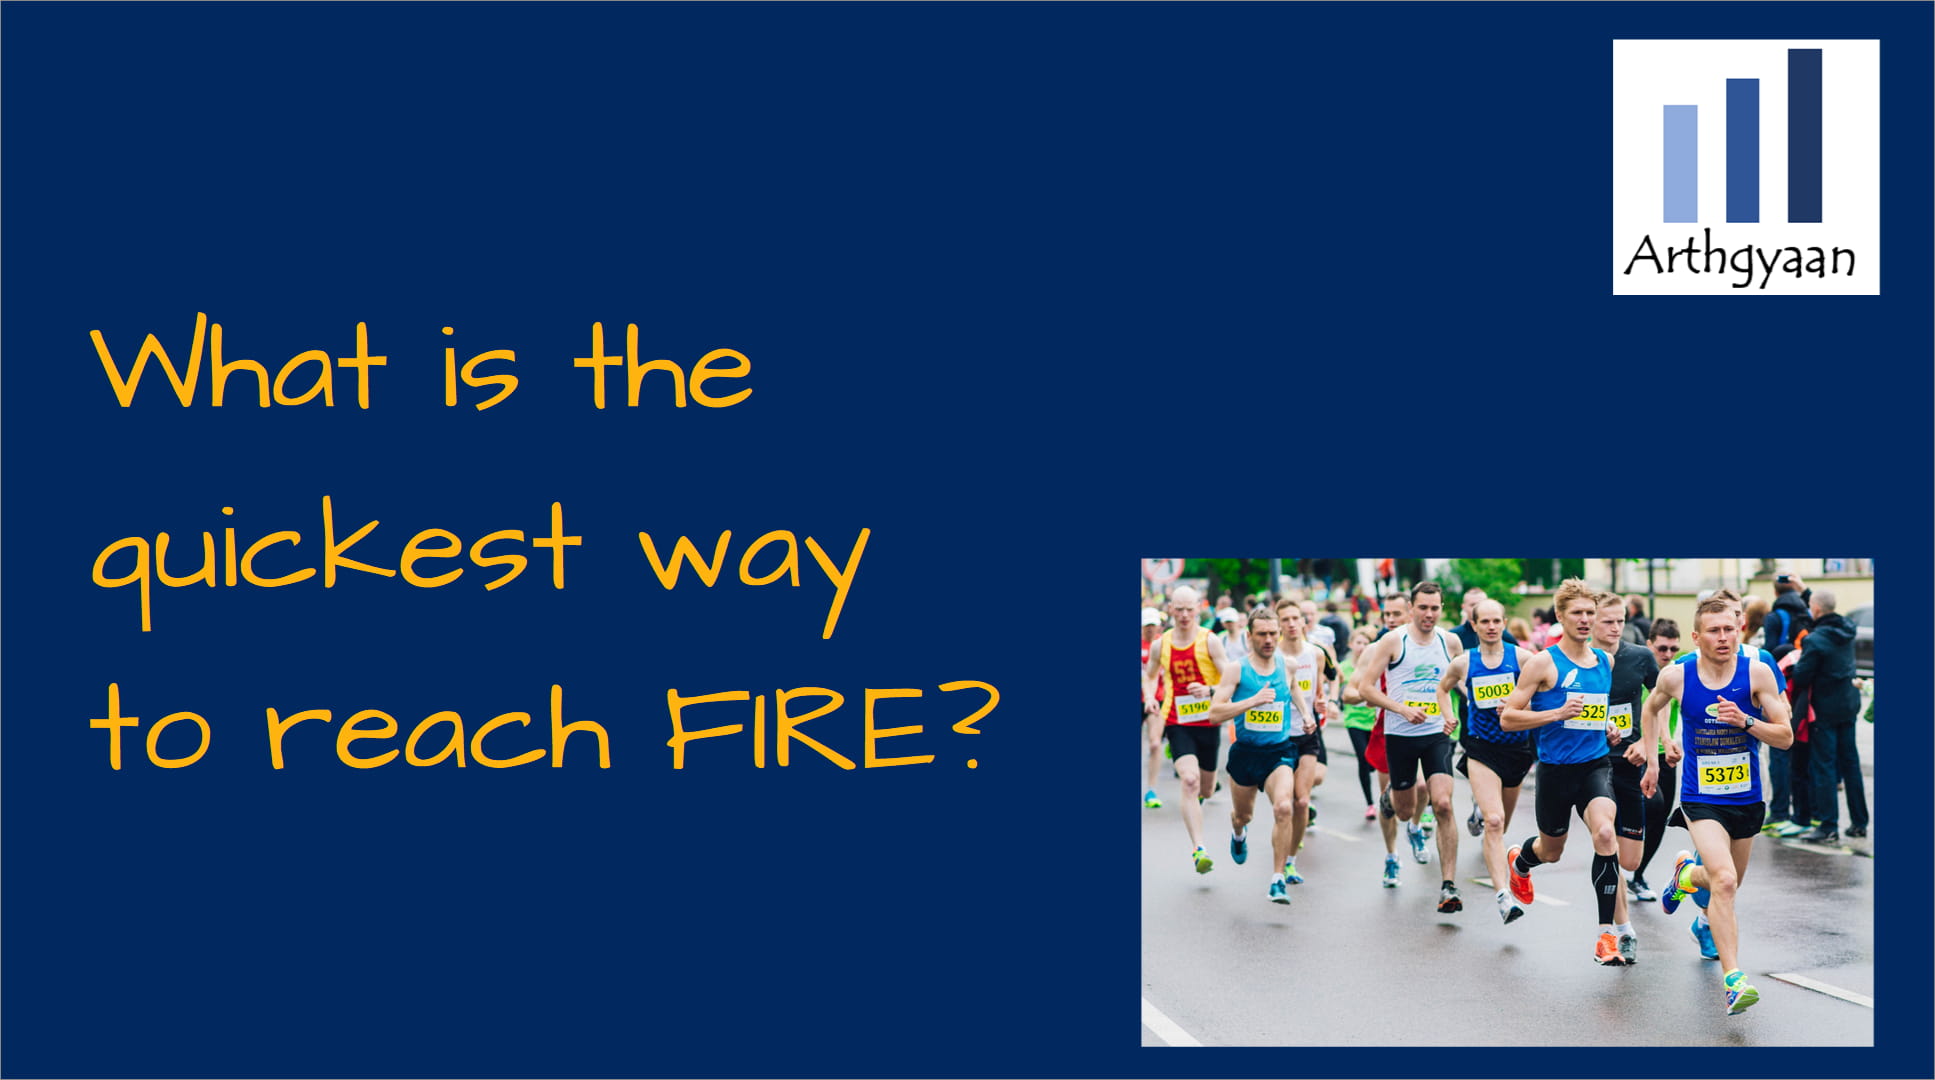 <p>If you are interested in FIRE, you need to know about the best way to reach that goal. This post shows how.</p>

